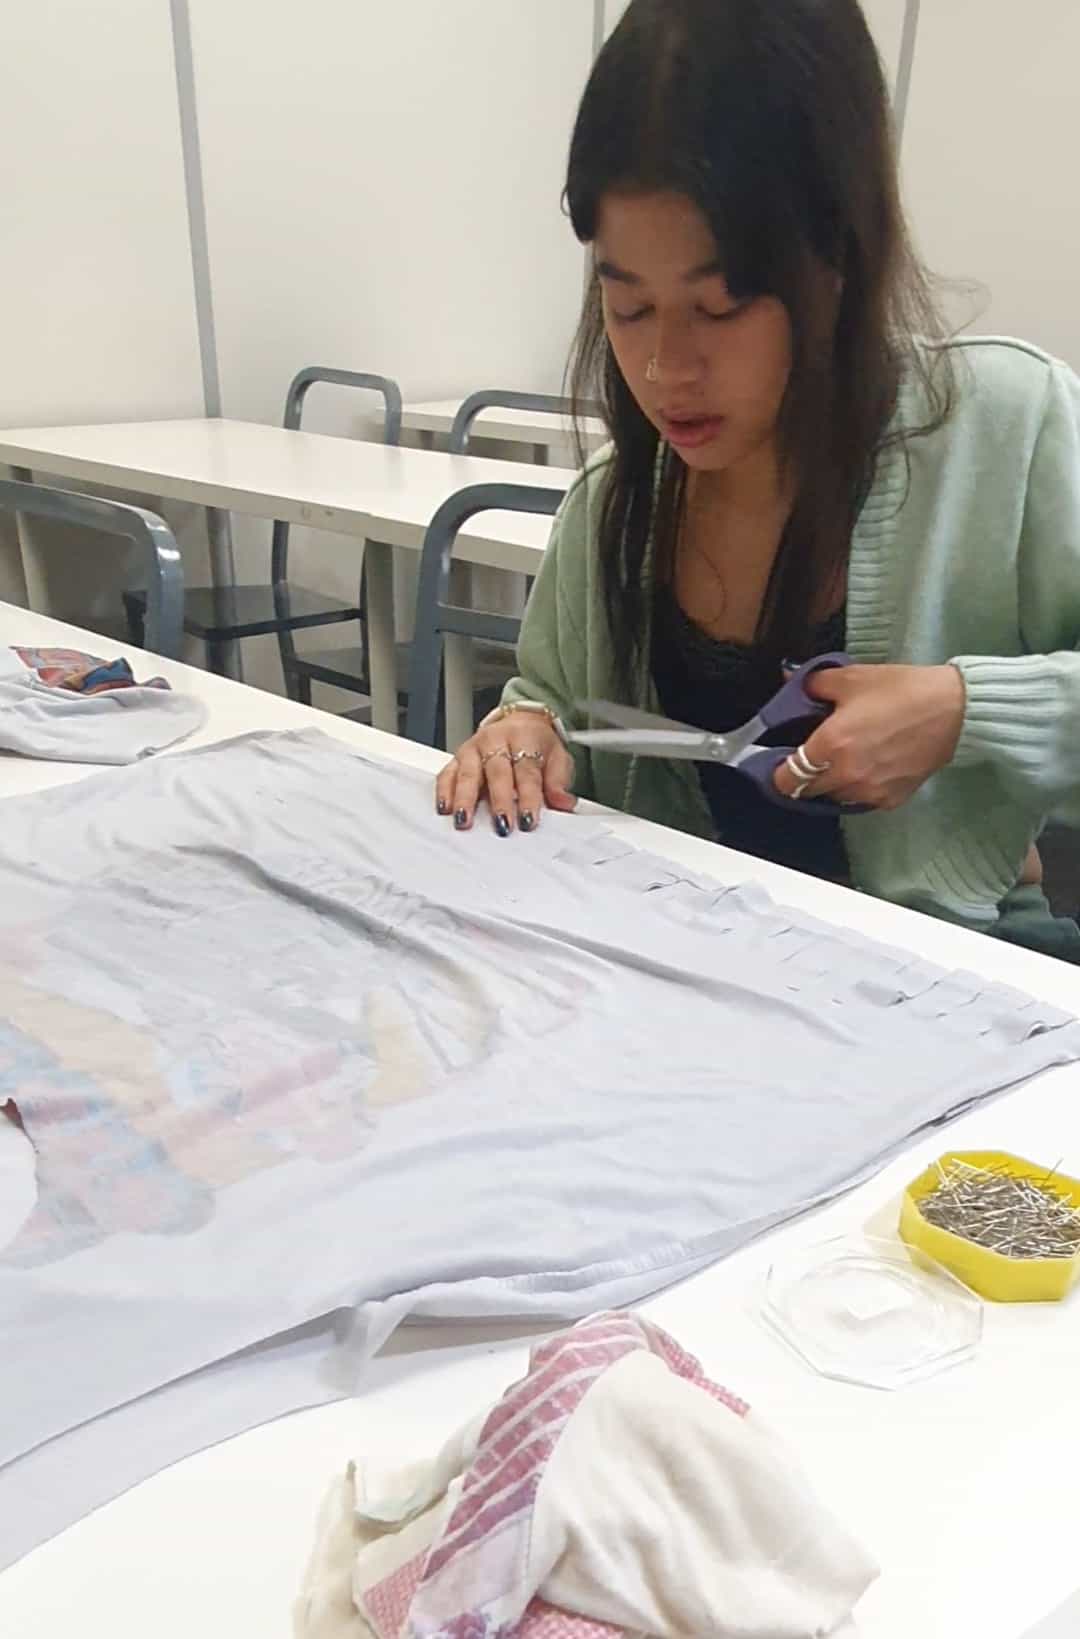 Bachelor Fashion Design Student Supinya, from Thailand